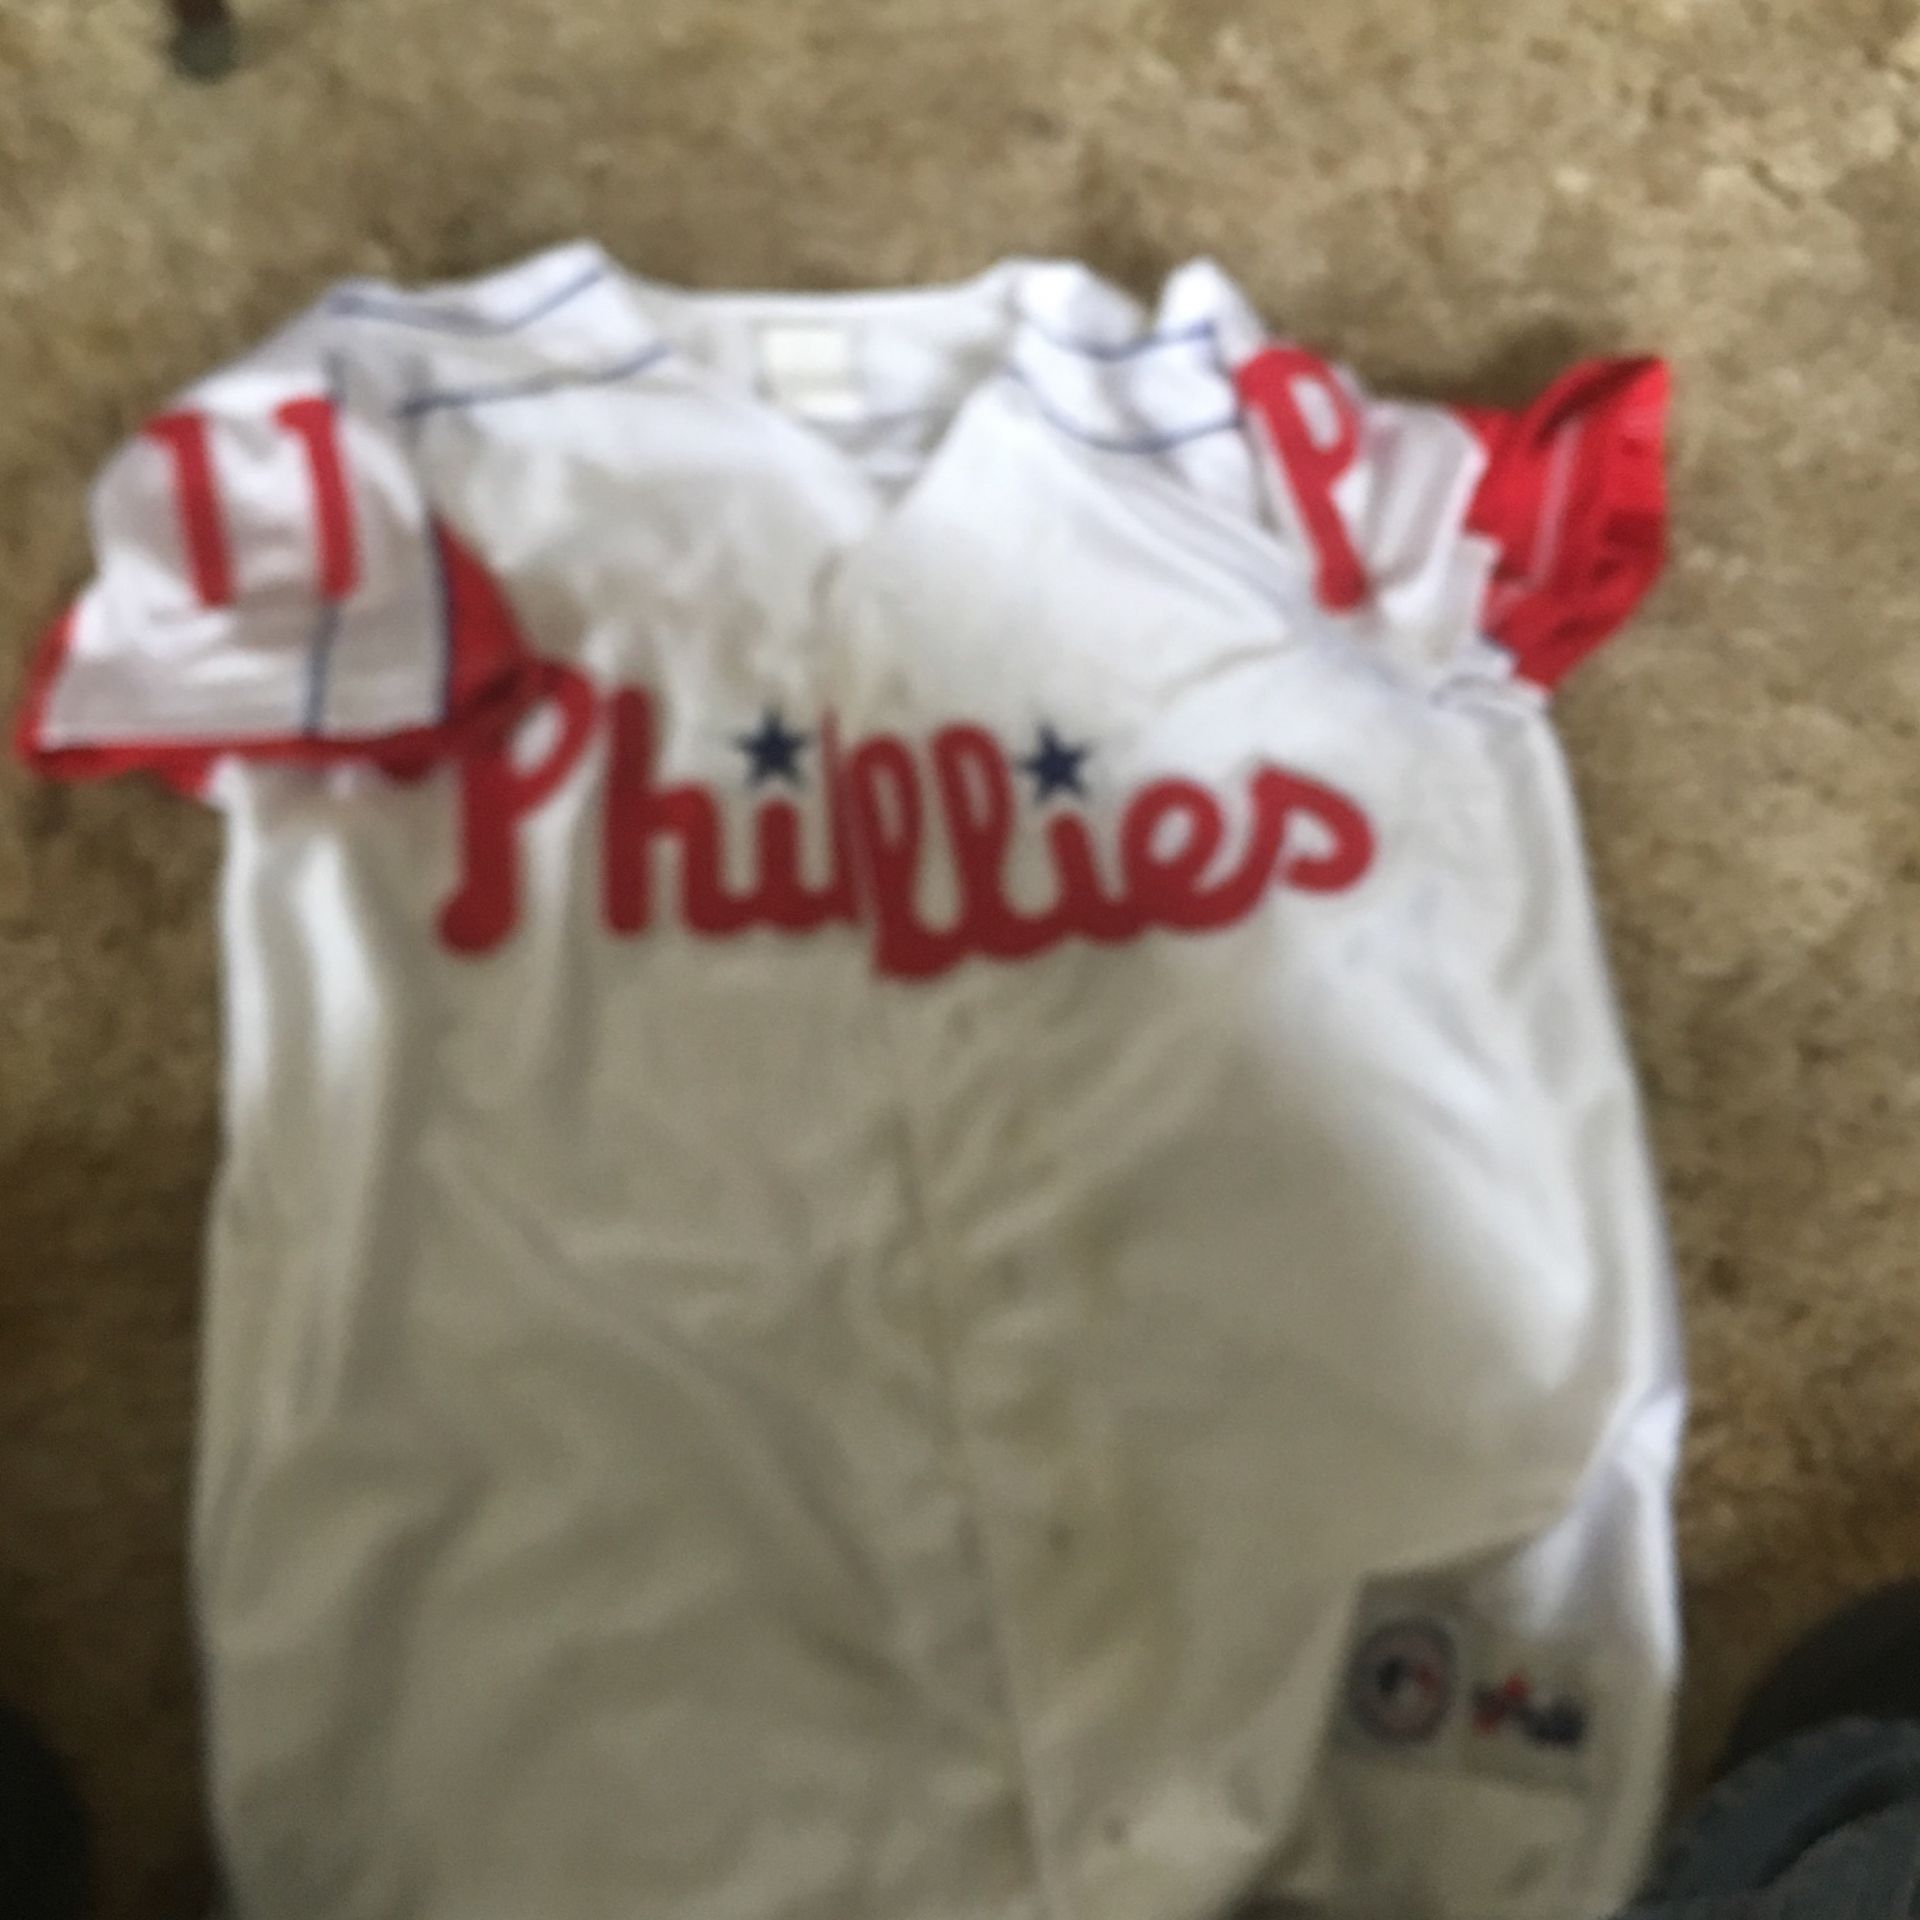 Phillies Jersey for Sale in Egg Harbor Township, NJ - OfferUp